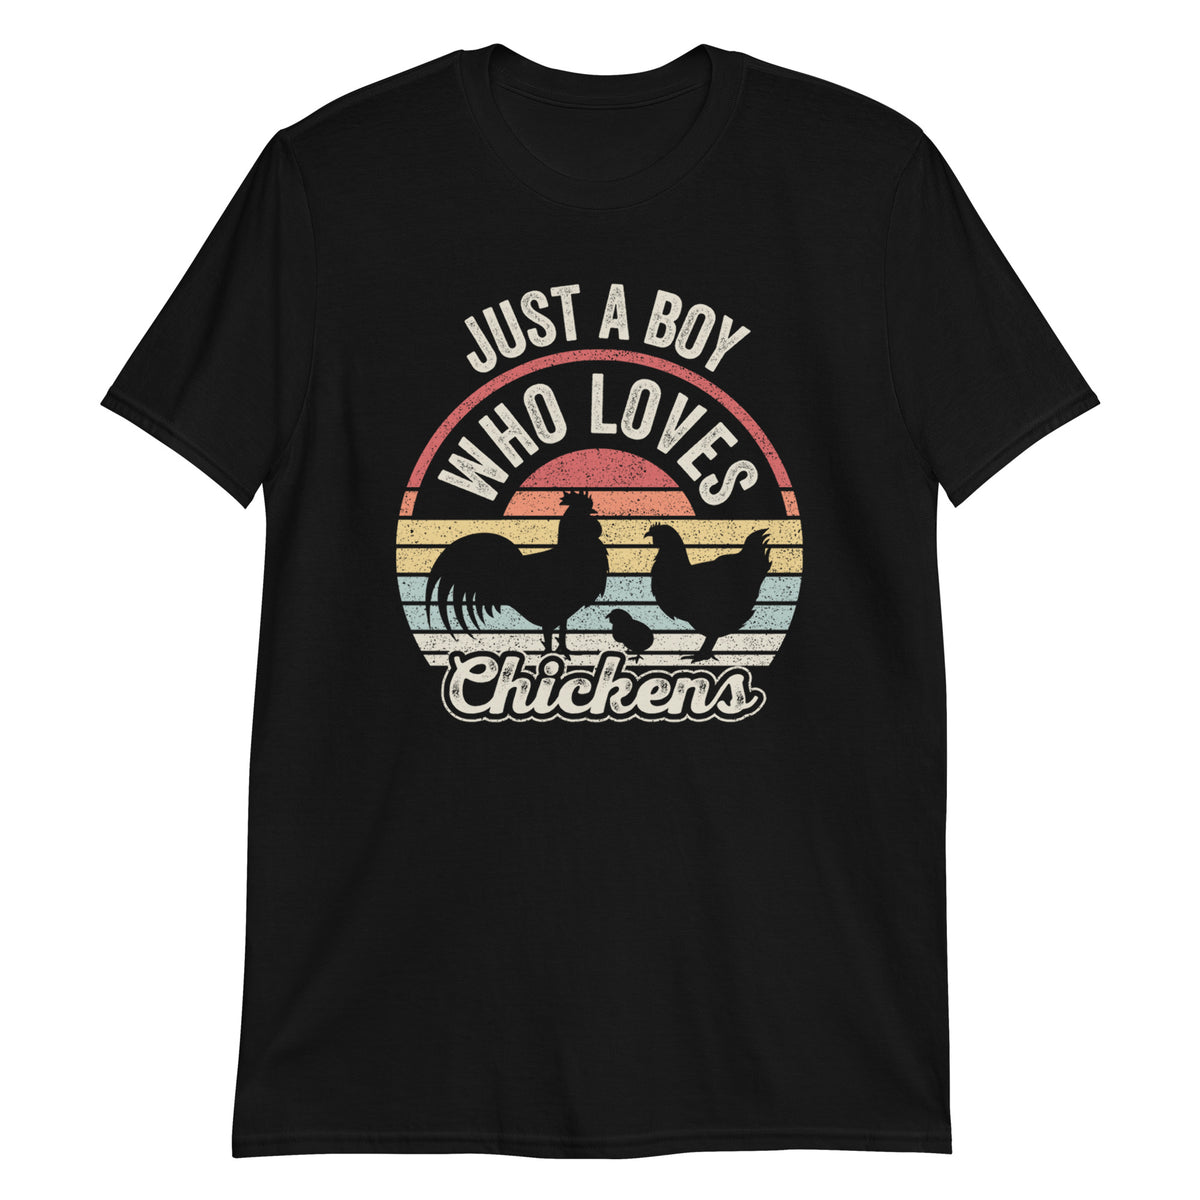 Just A Boy Who Loves Chickens T-Shirt